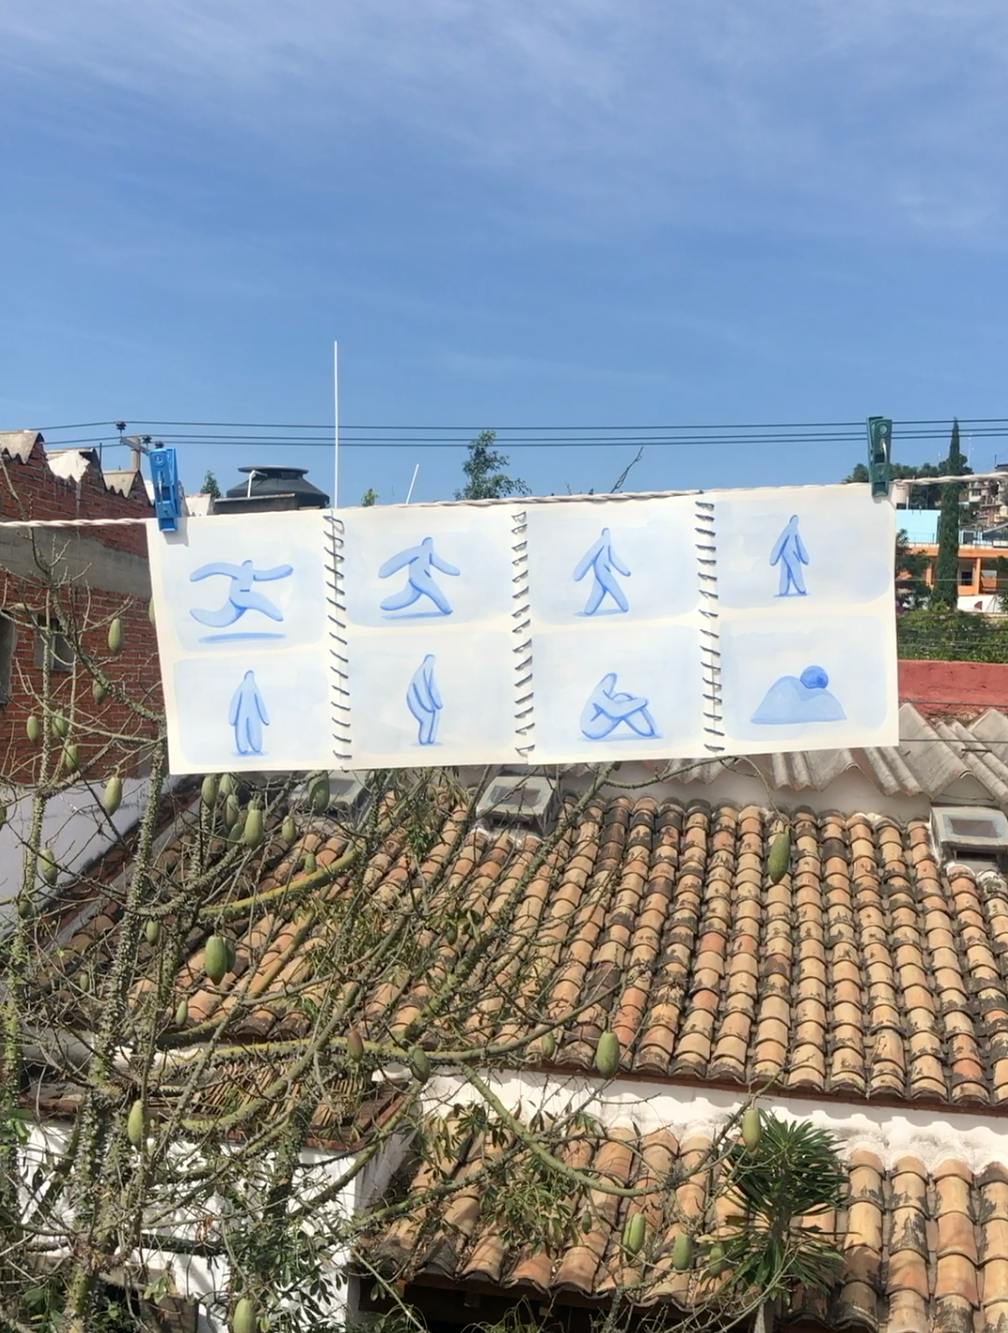 Blue figurative drawings by artist Jocelyn Tsaih pinned on a clothesline suspended in the air above house roofs.